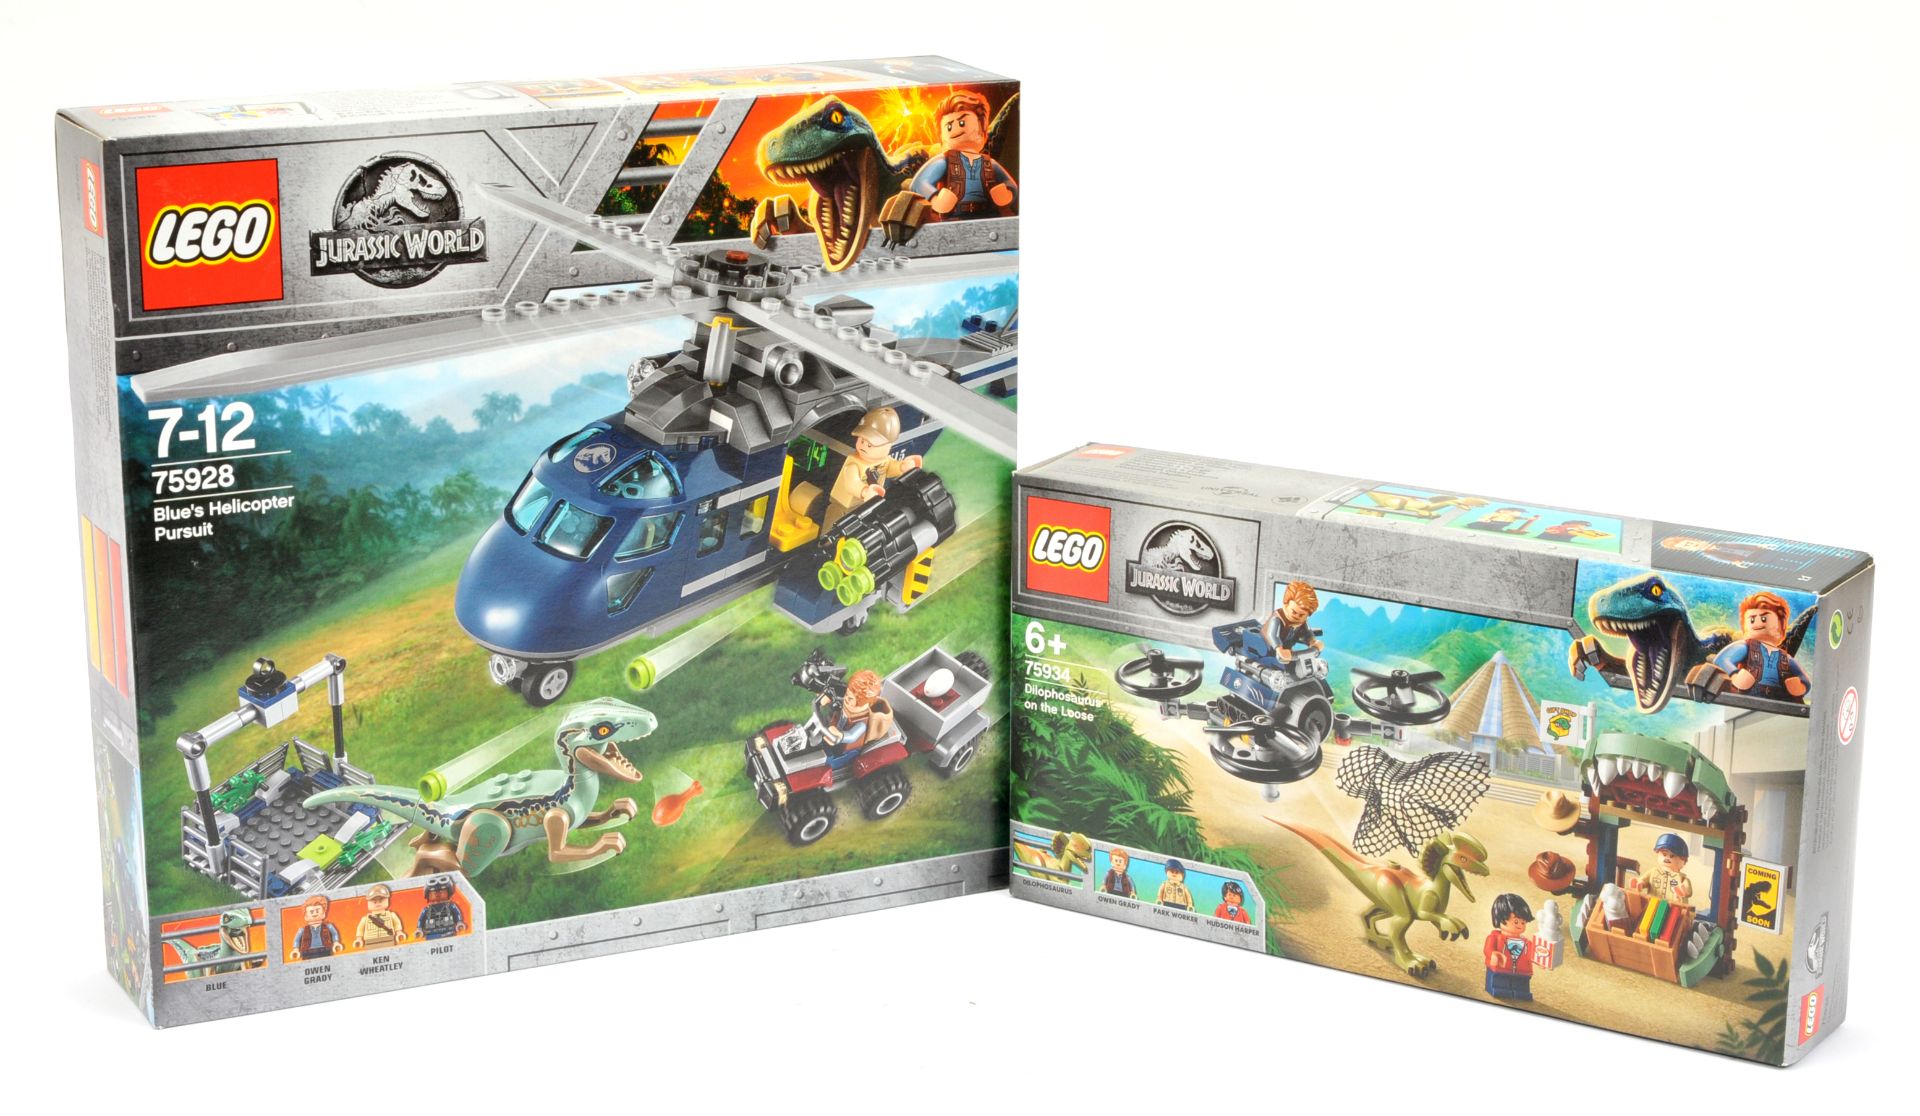 Lego Jurassic World sets to include 75928 Blue's Helicopter Pursuit, 75934 Dilophosaurus on the L...